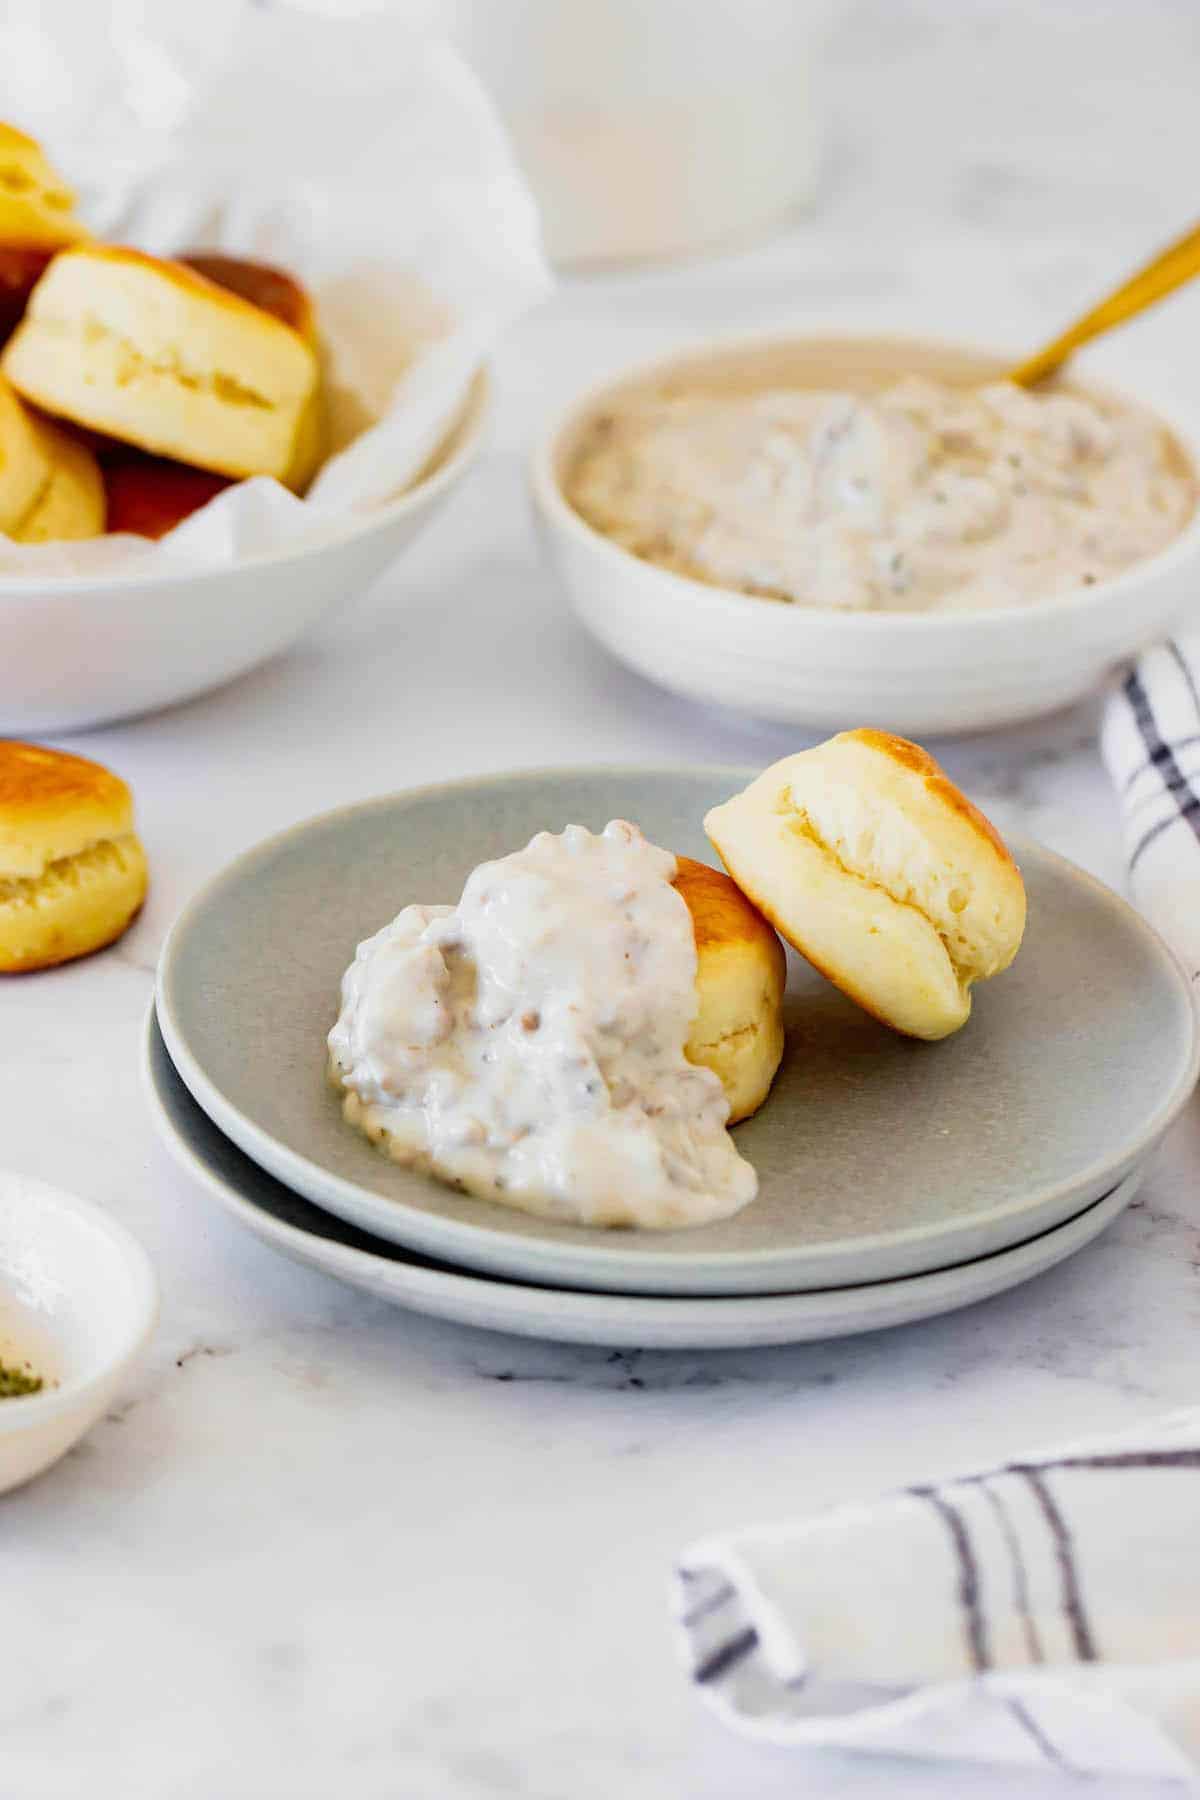 Two Buttermilk Biscuits on a Plate with a Heaping Scoop of Sausage Gravy